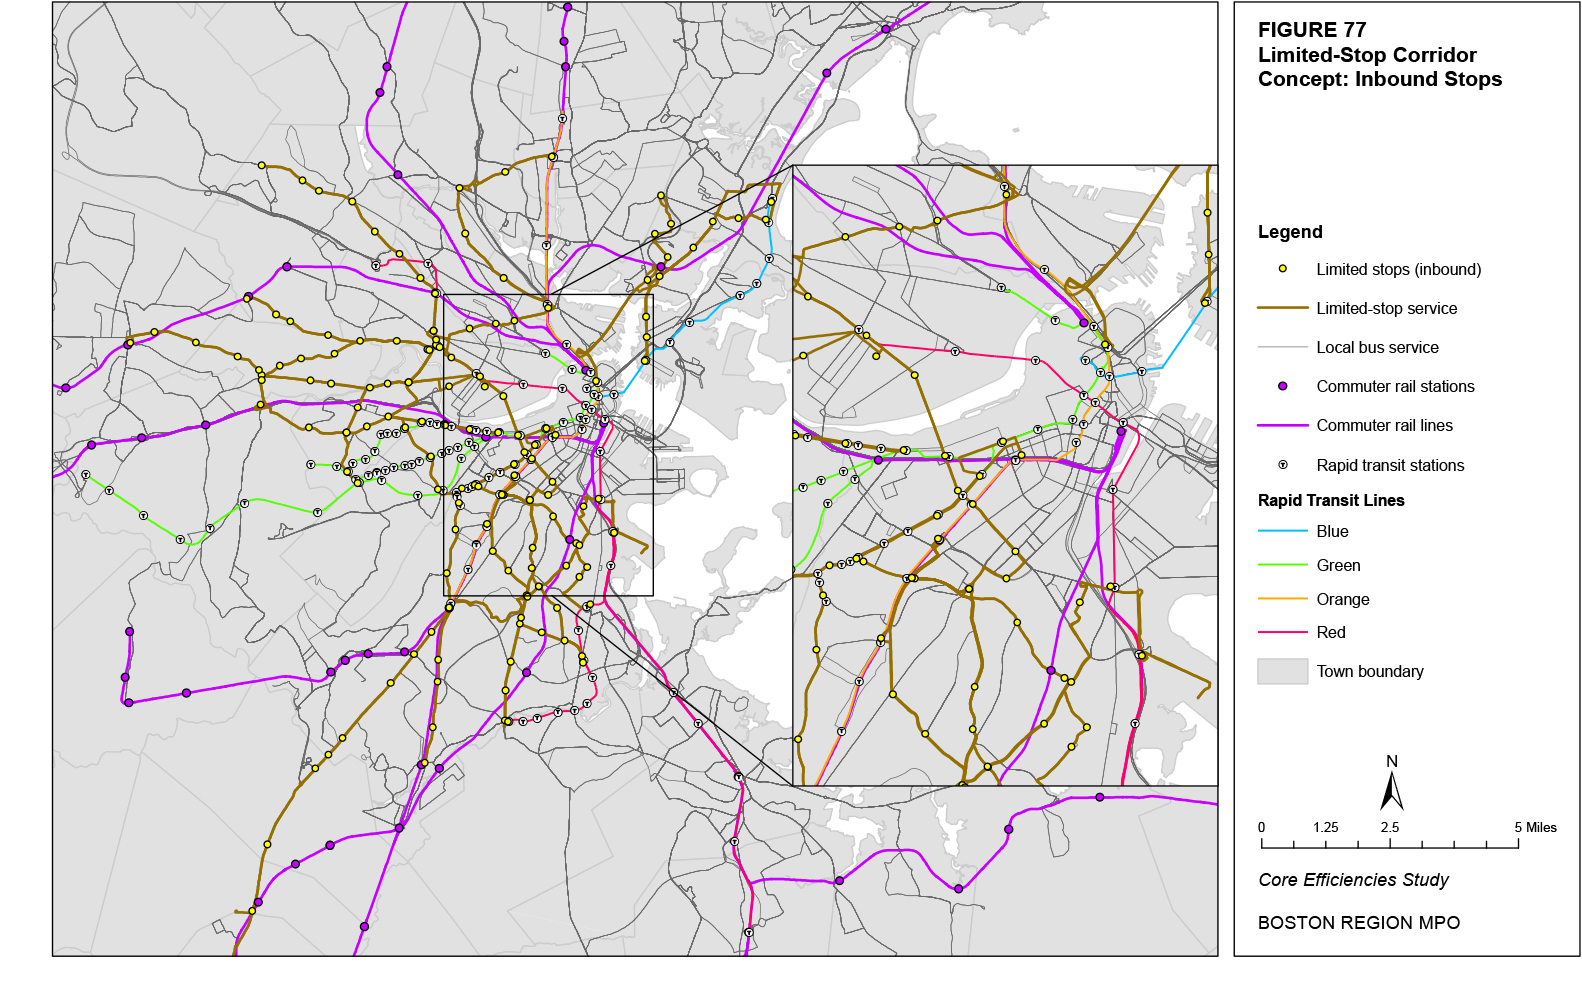 This map shows the MBTA bus, rapid transit, and commuter rail network with the proposed changes in the limited-stop corridor concept for inbound bus service.